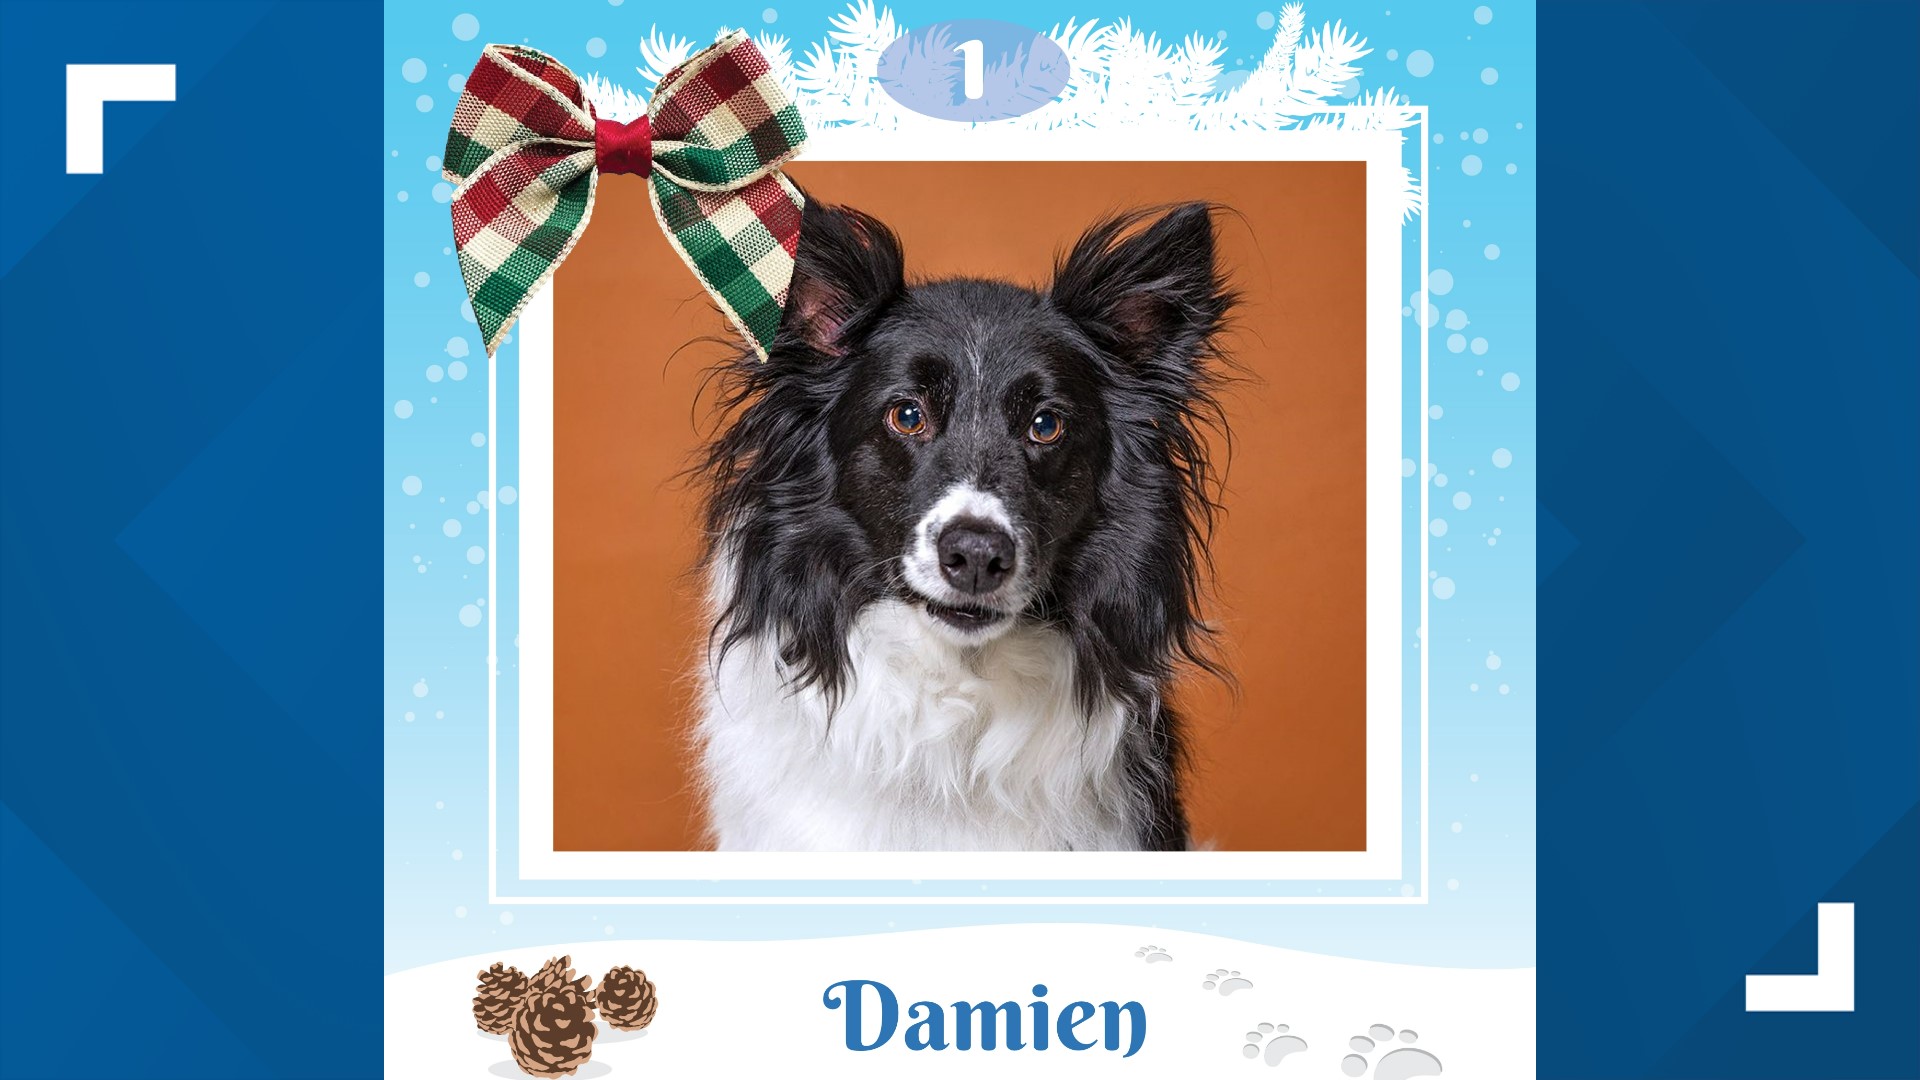 Damien is a 5-year-old Border Collie mix looking for his fur-ever home. The Idaho Humane Society is having a 50% off Tuxedo Dog Sale through Sunday, Dec. 10.